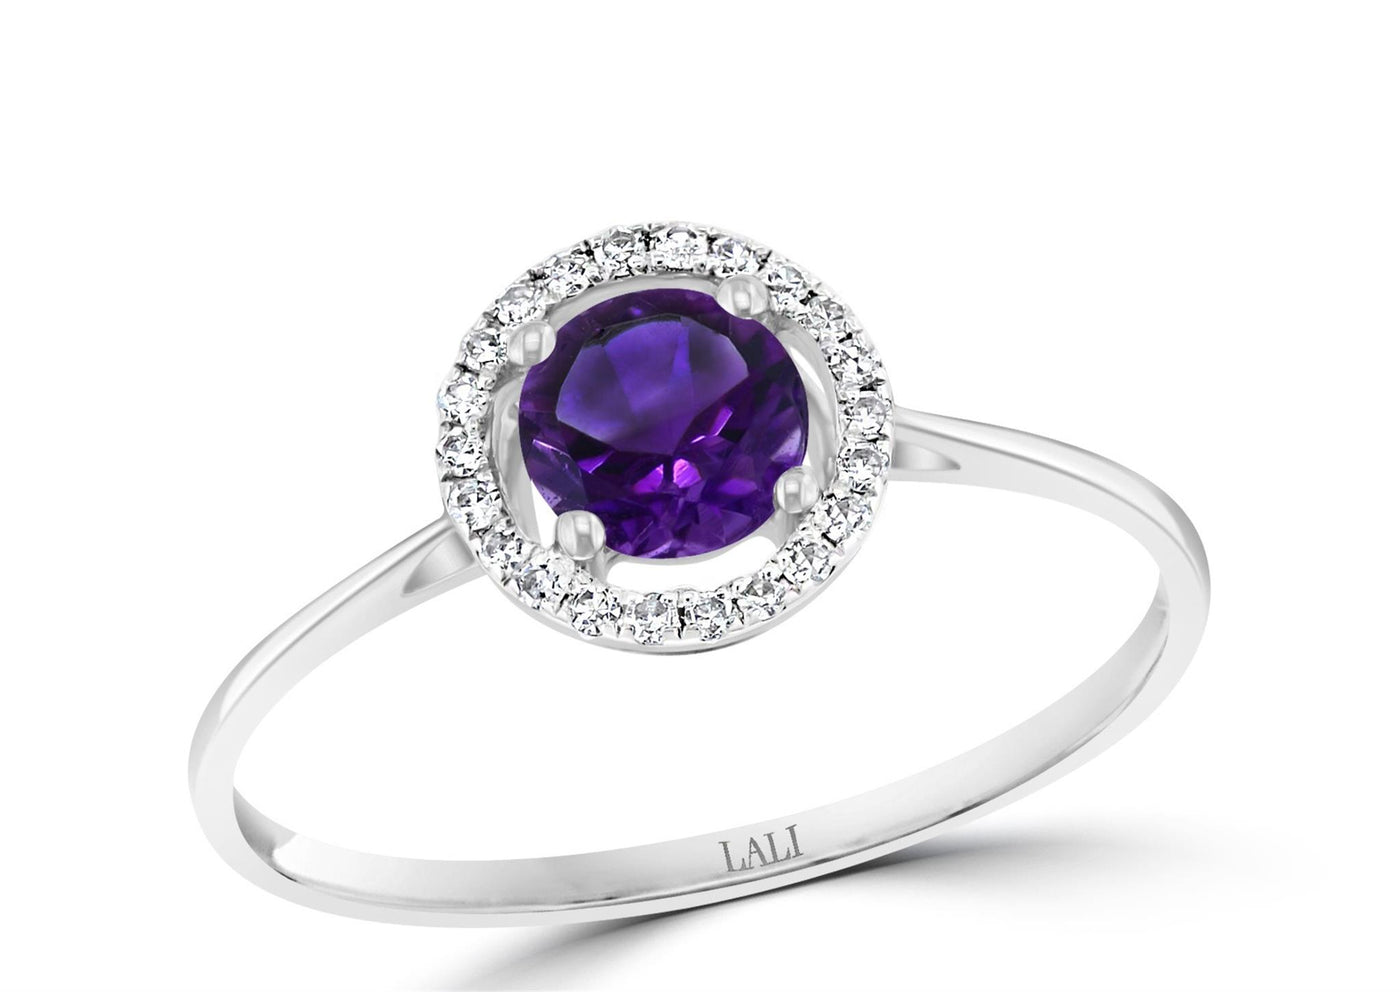 14K White Gold .52ctw Halo Style Ring with Amethyst and Diamonds